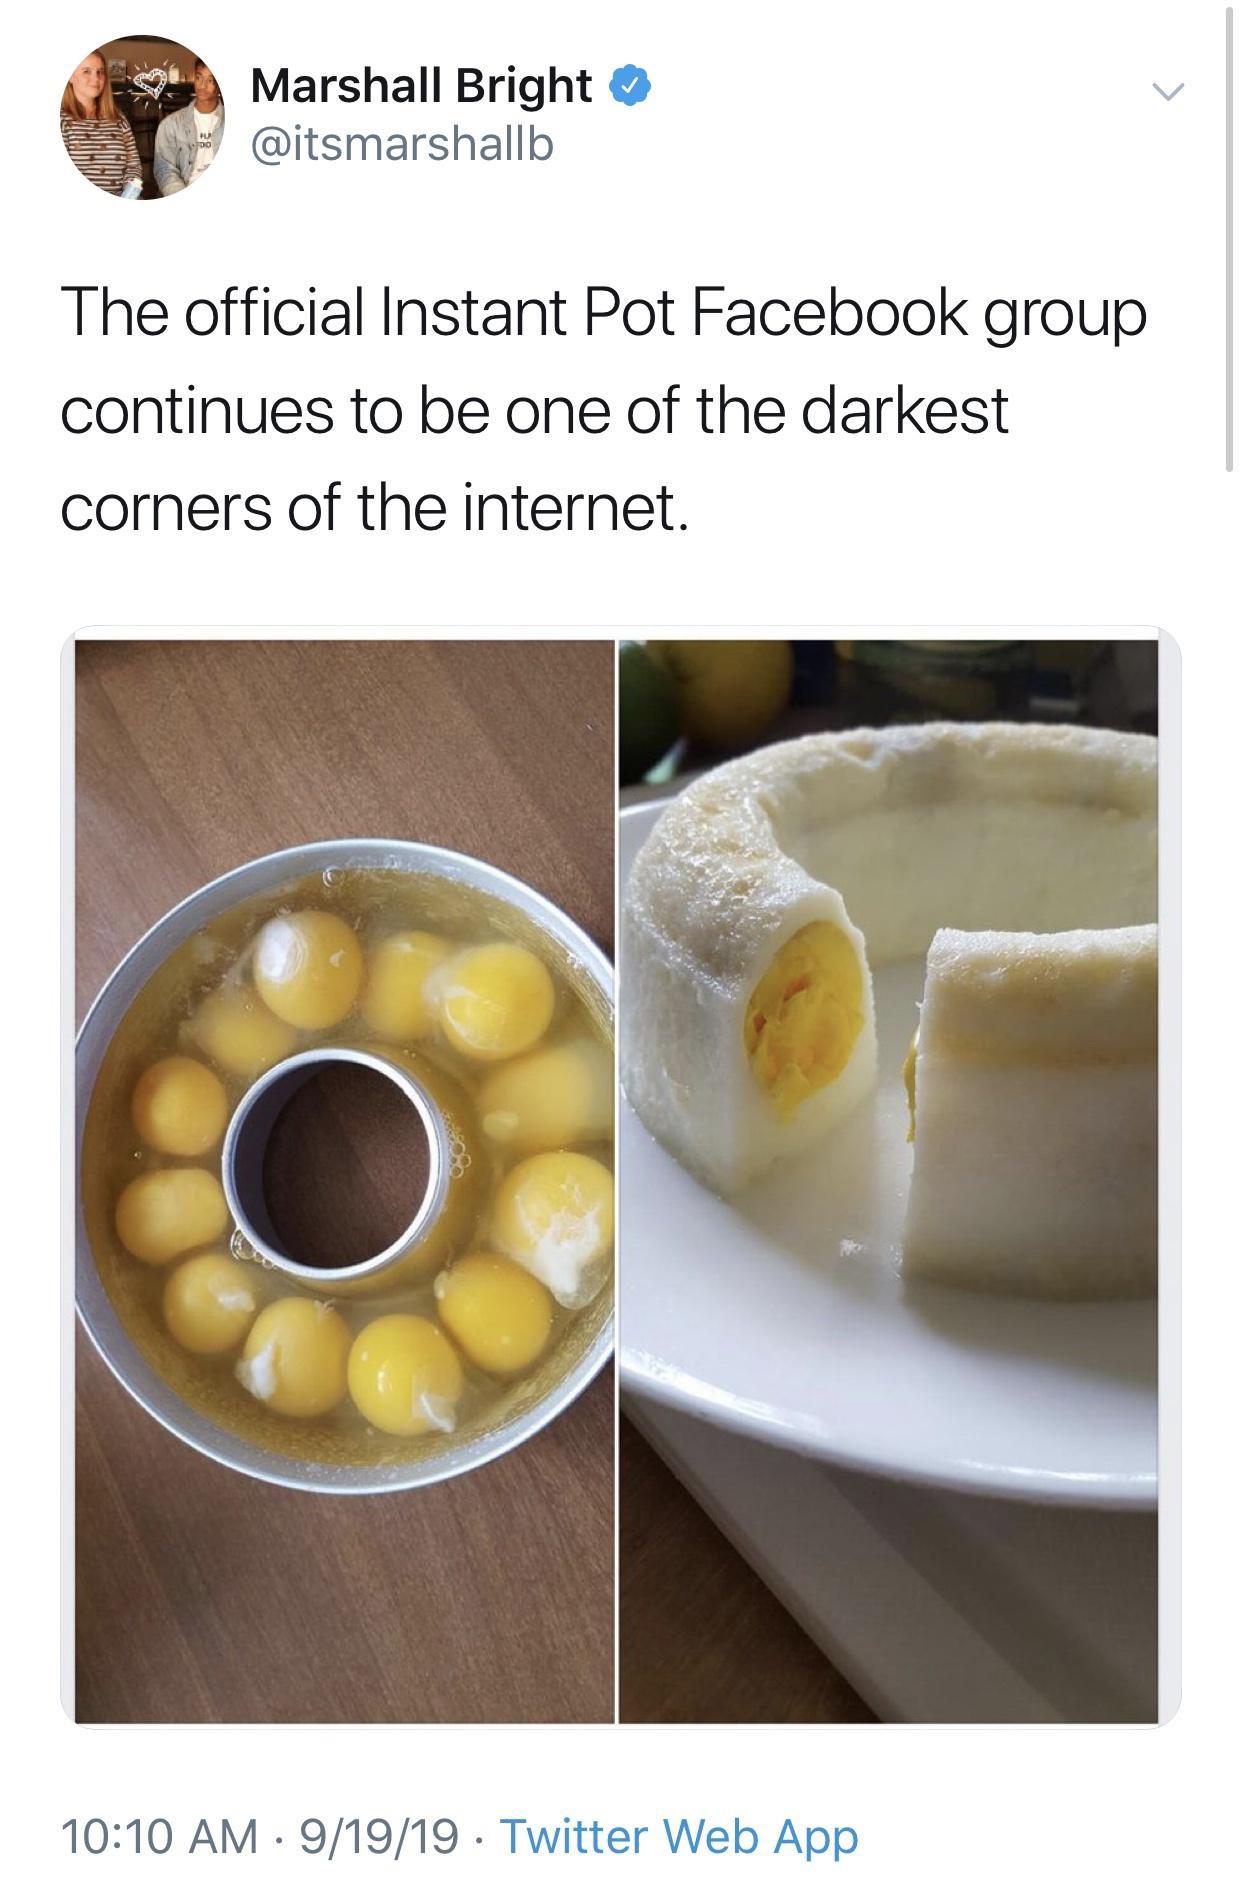 12 egg cake - Marshall Bright The official Instant Pot Facebook group continues to be one of the darkest corners of the internet. 91919 Twitter Web App